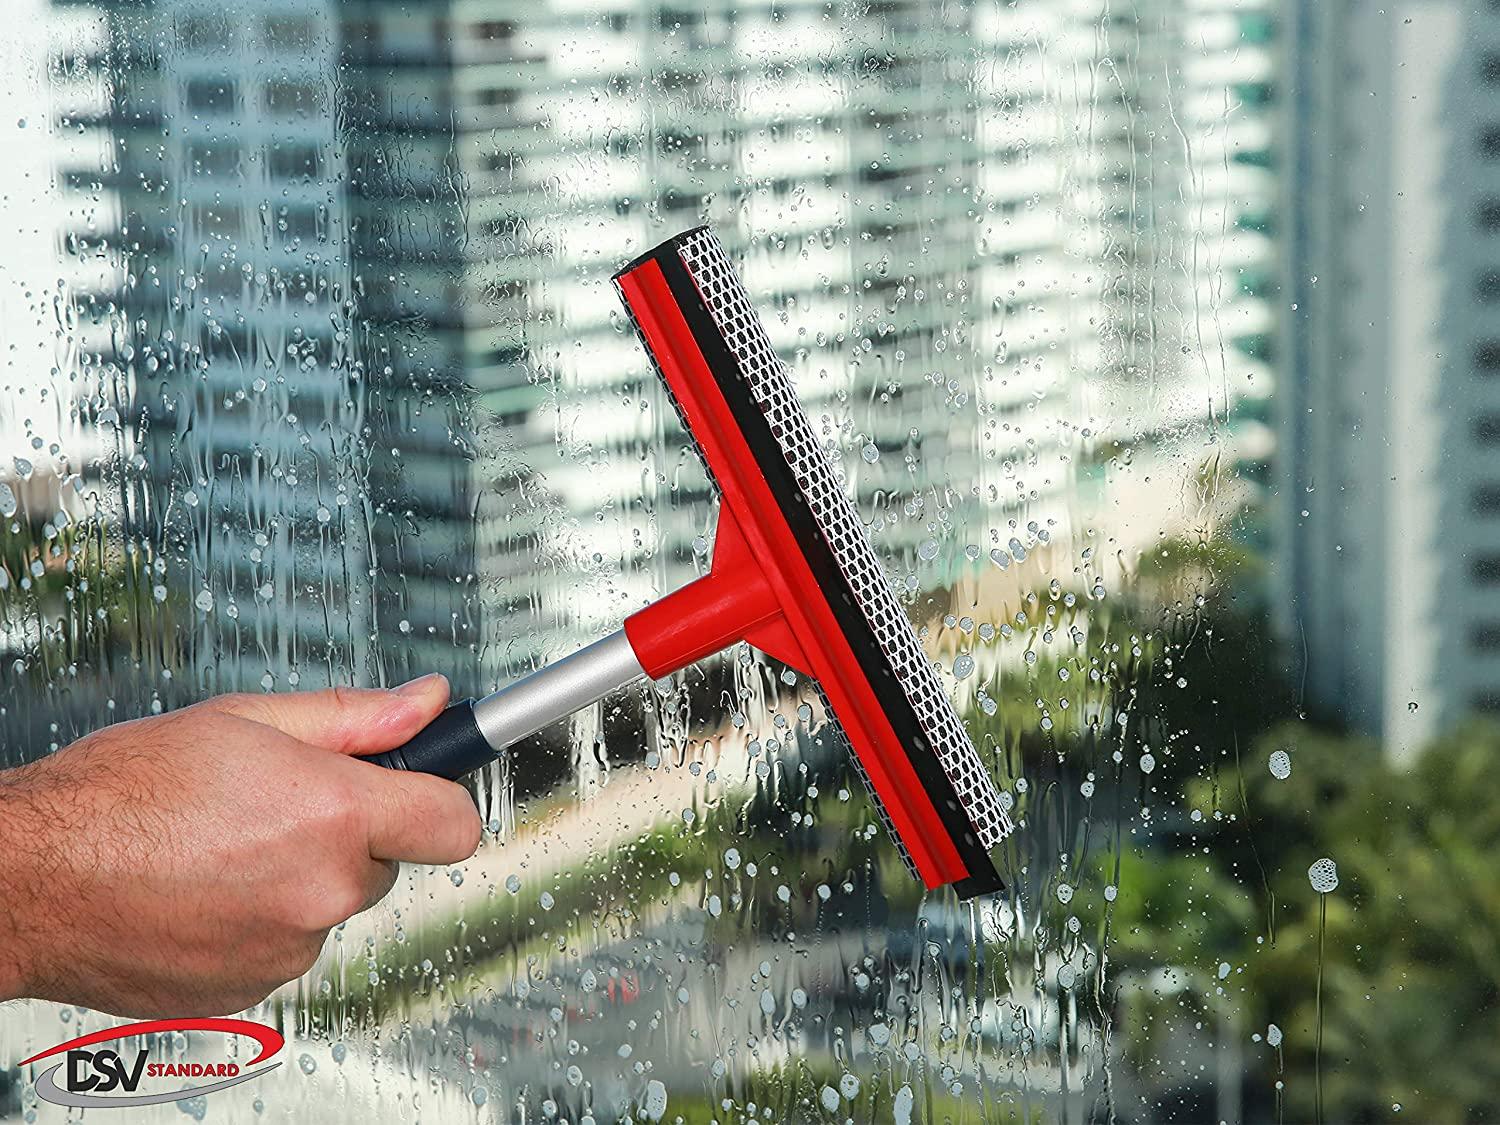 DSV Standard Shower Squeegee for Glass Doors, Squeegee for Window Cleaning,  All Purpose Window Cleaner Tool for Car Squeegee,Windshield | Mini Window